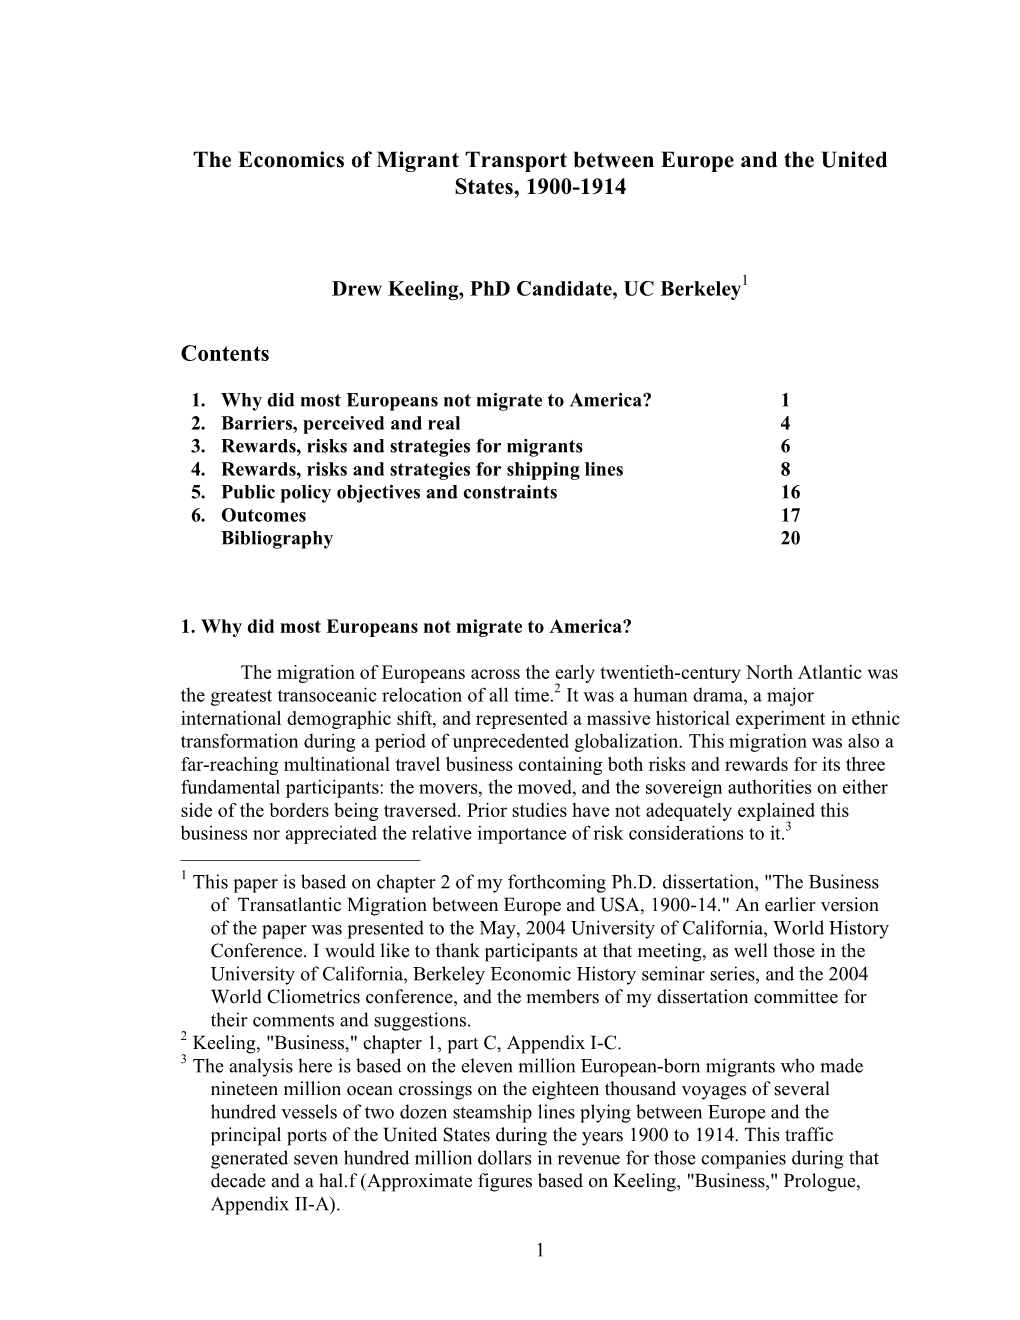 The Economics of Migrant Transport Between Europe and the United States, 1900-1914